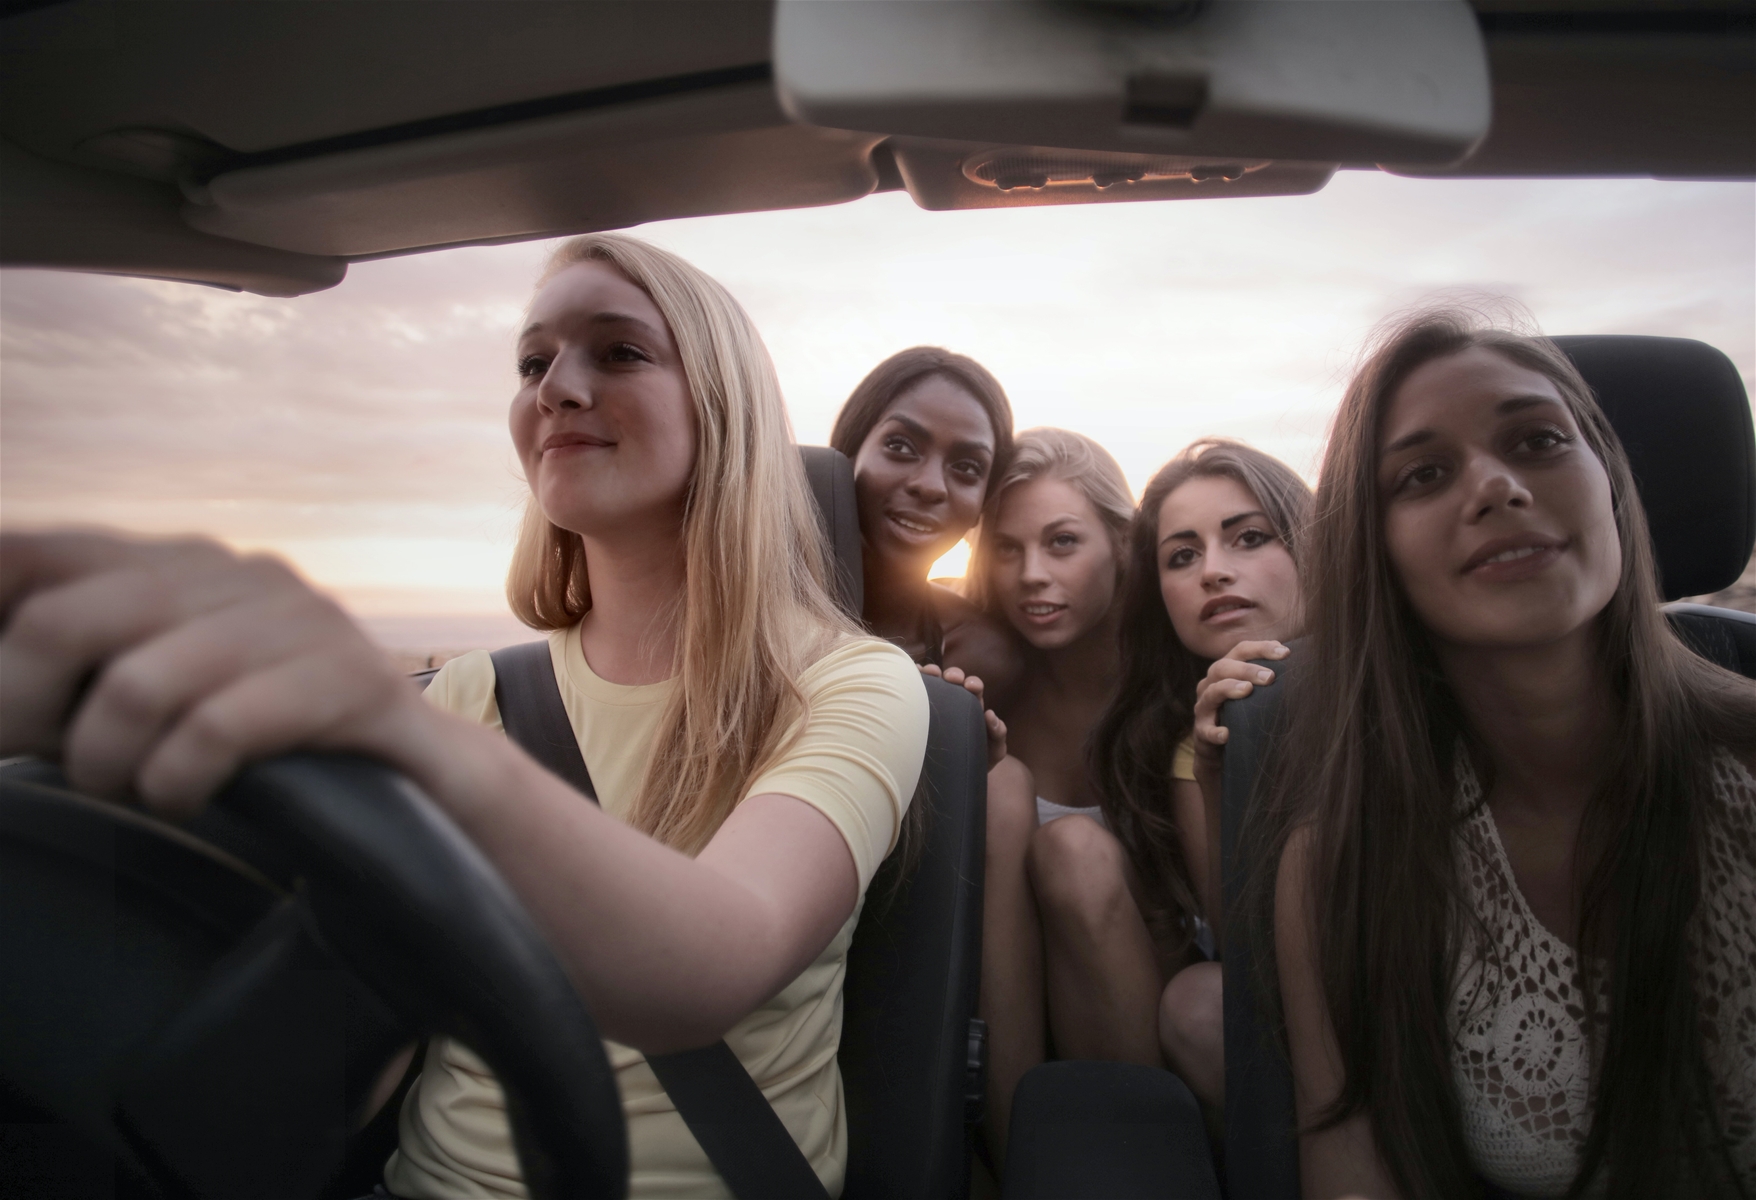 Group of Girls in Car